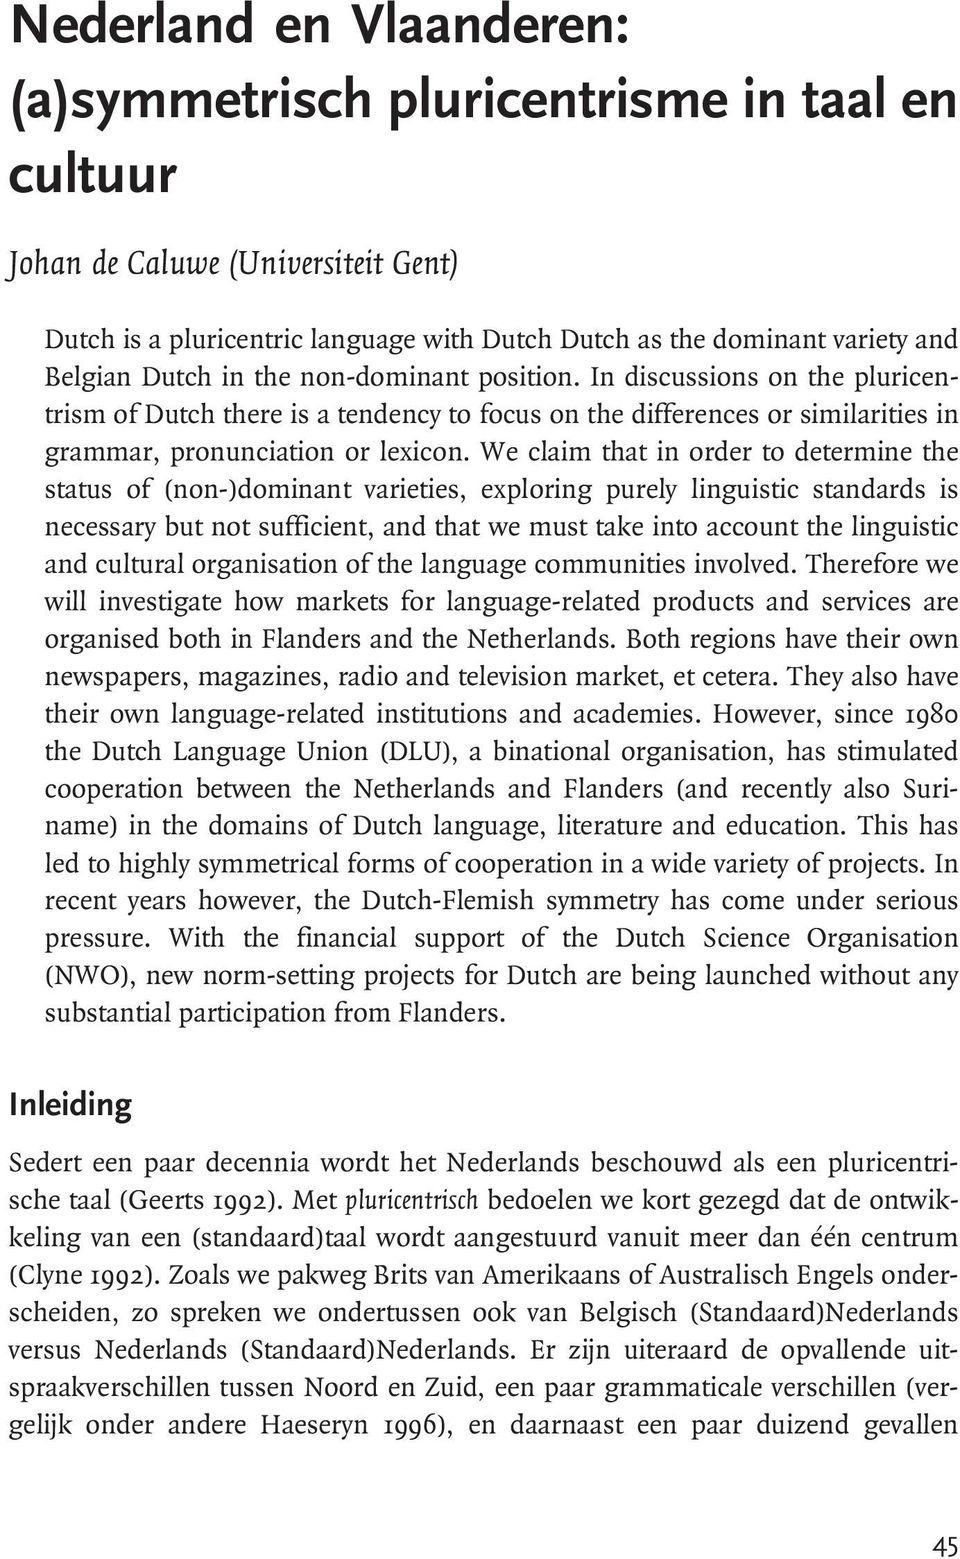 We claim that in order to determine the status of (non-)dominant varieties, exploring purely linguistic standards is necessary but not sufficient, and that we must take into account the linguistic